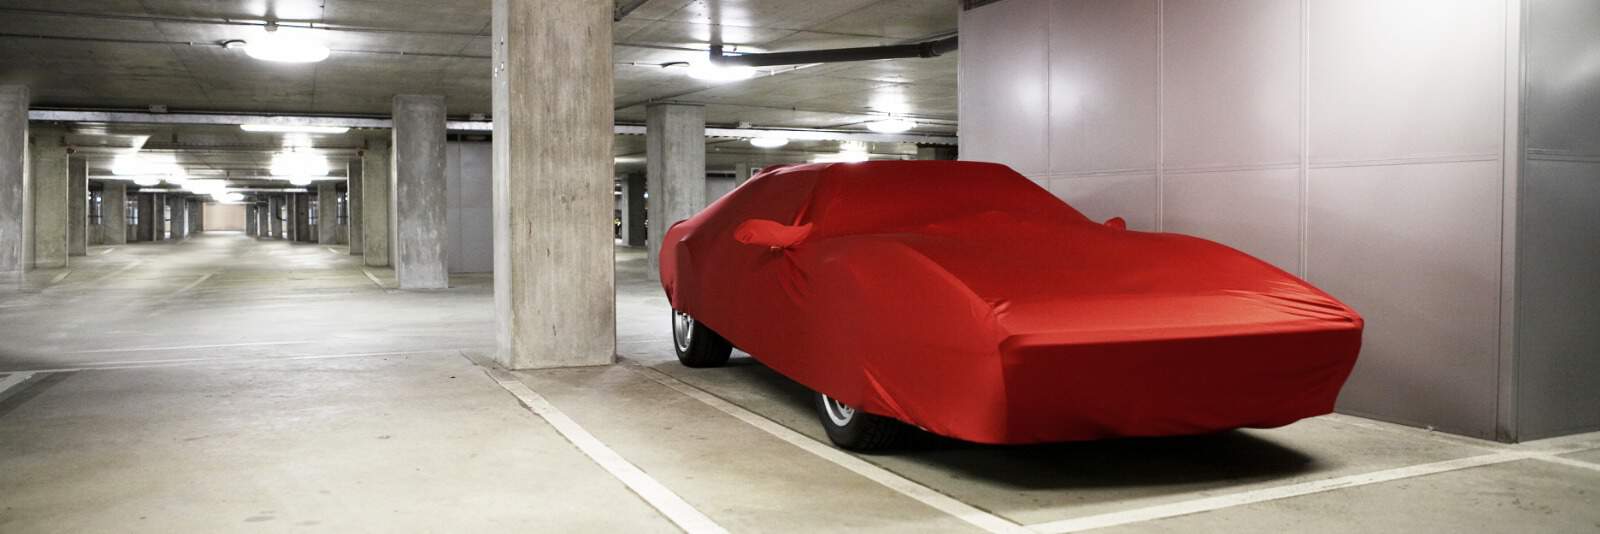 Sports Car in Storage under a Cover